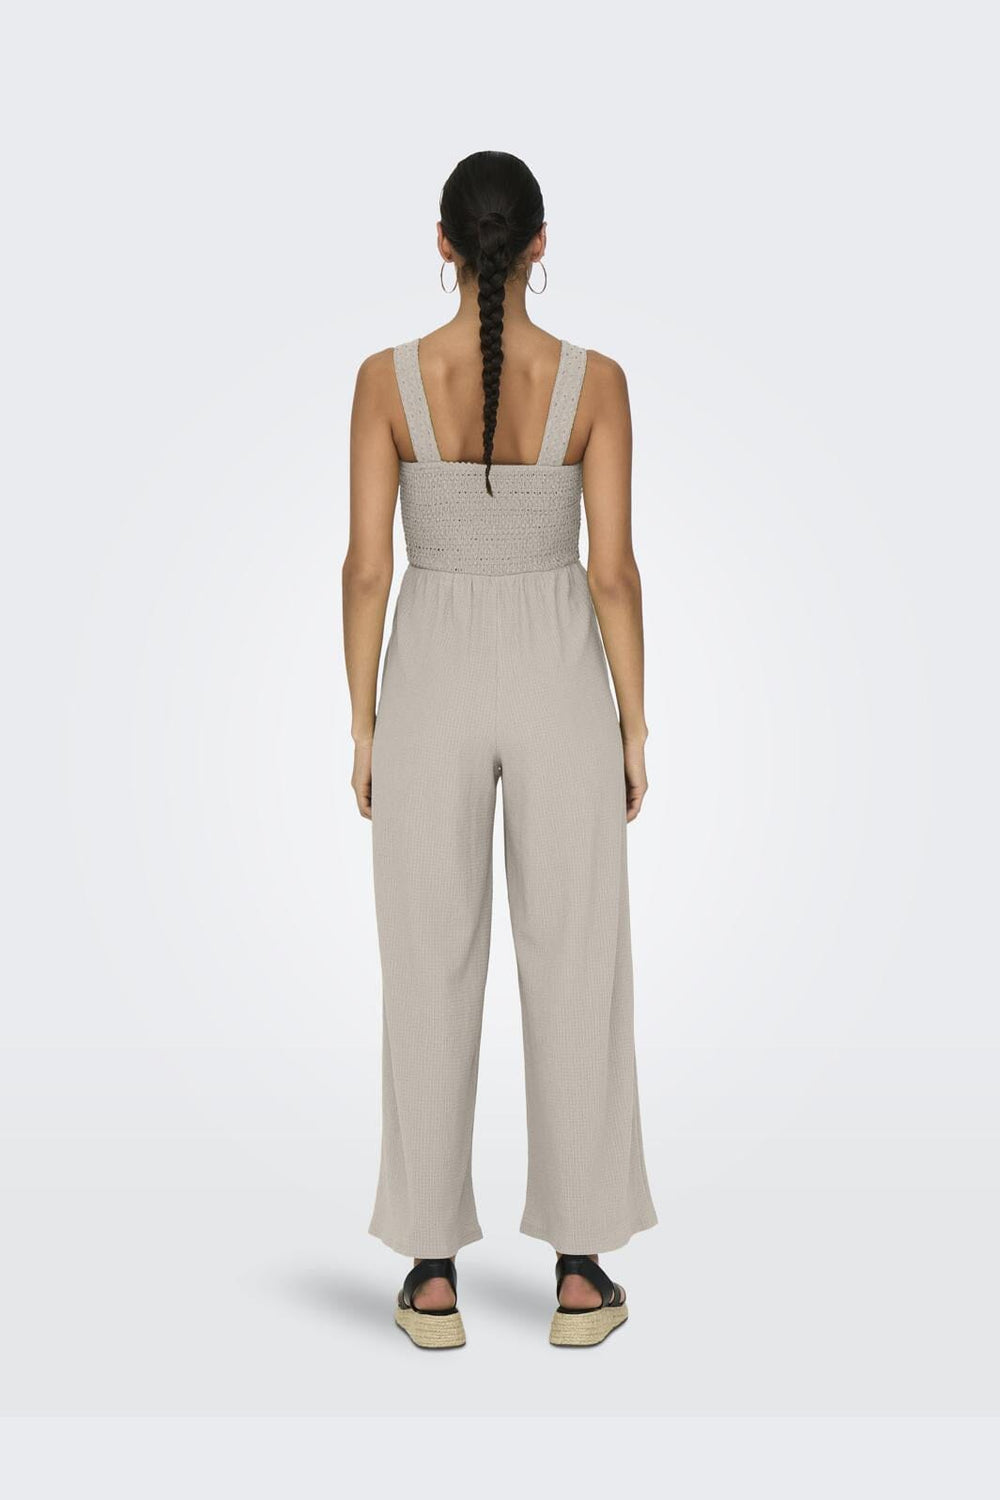 Only - Onlelise S/L Smock Jumpsuit - 4570241 Pumice Stone